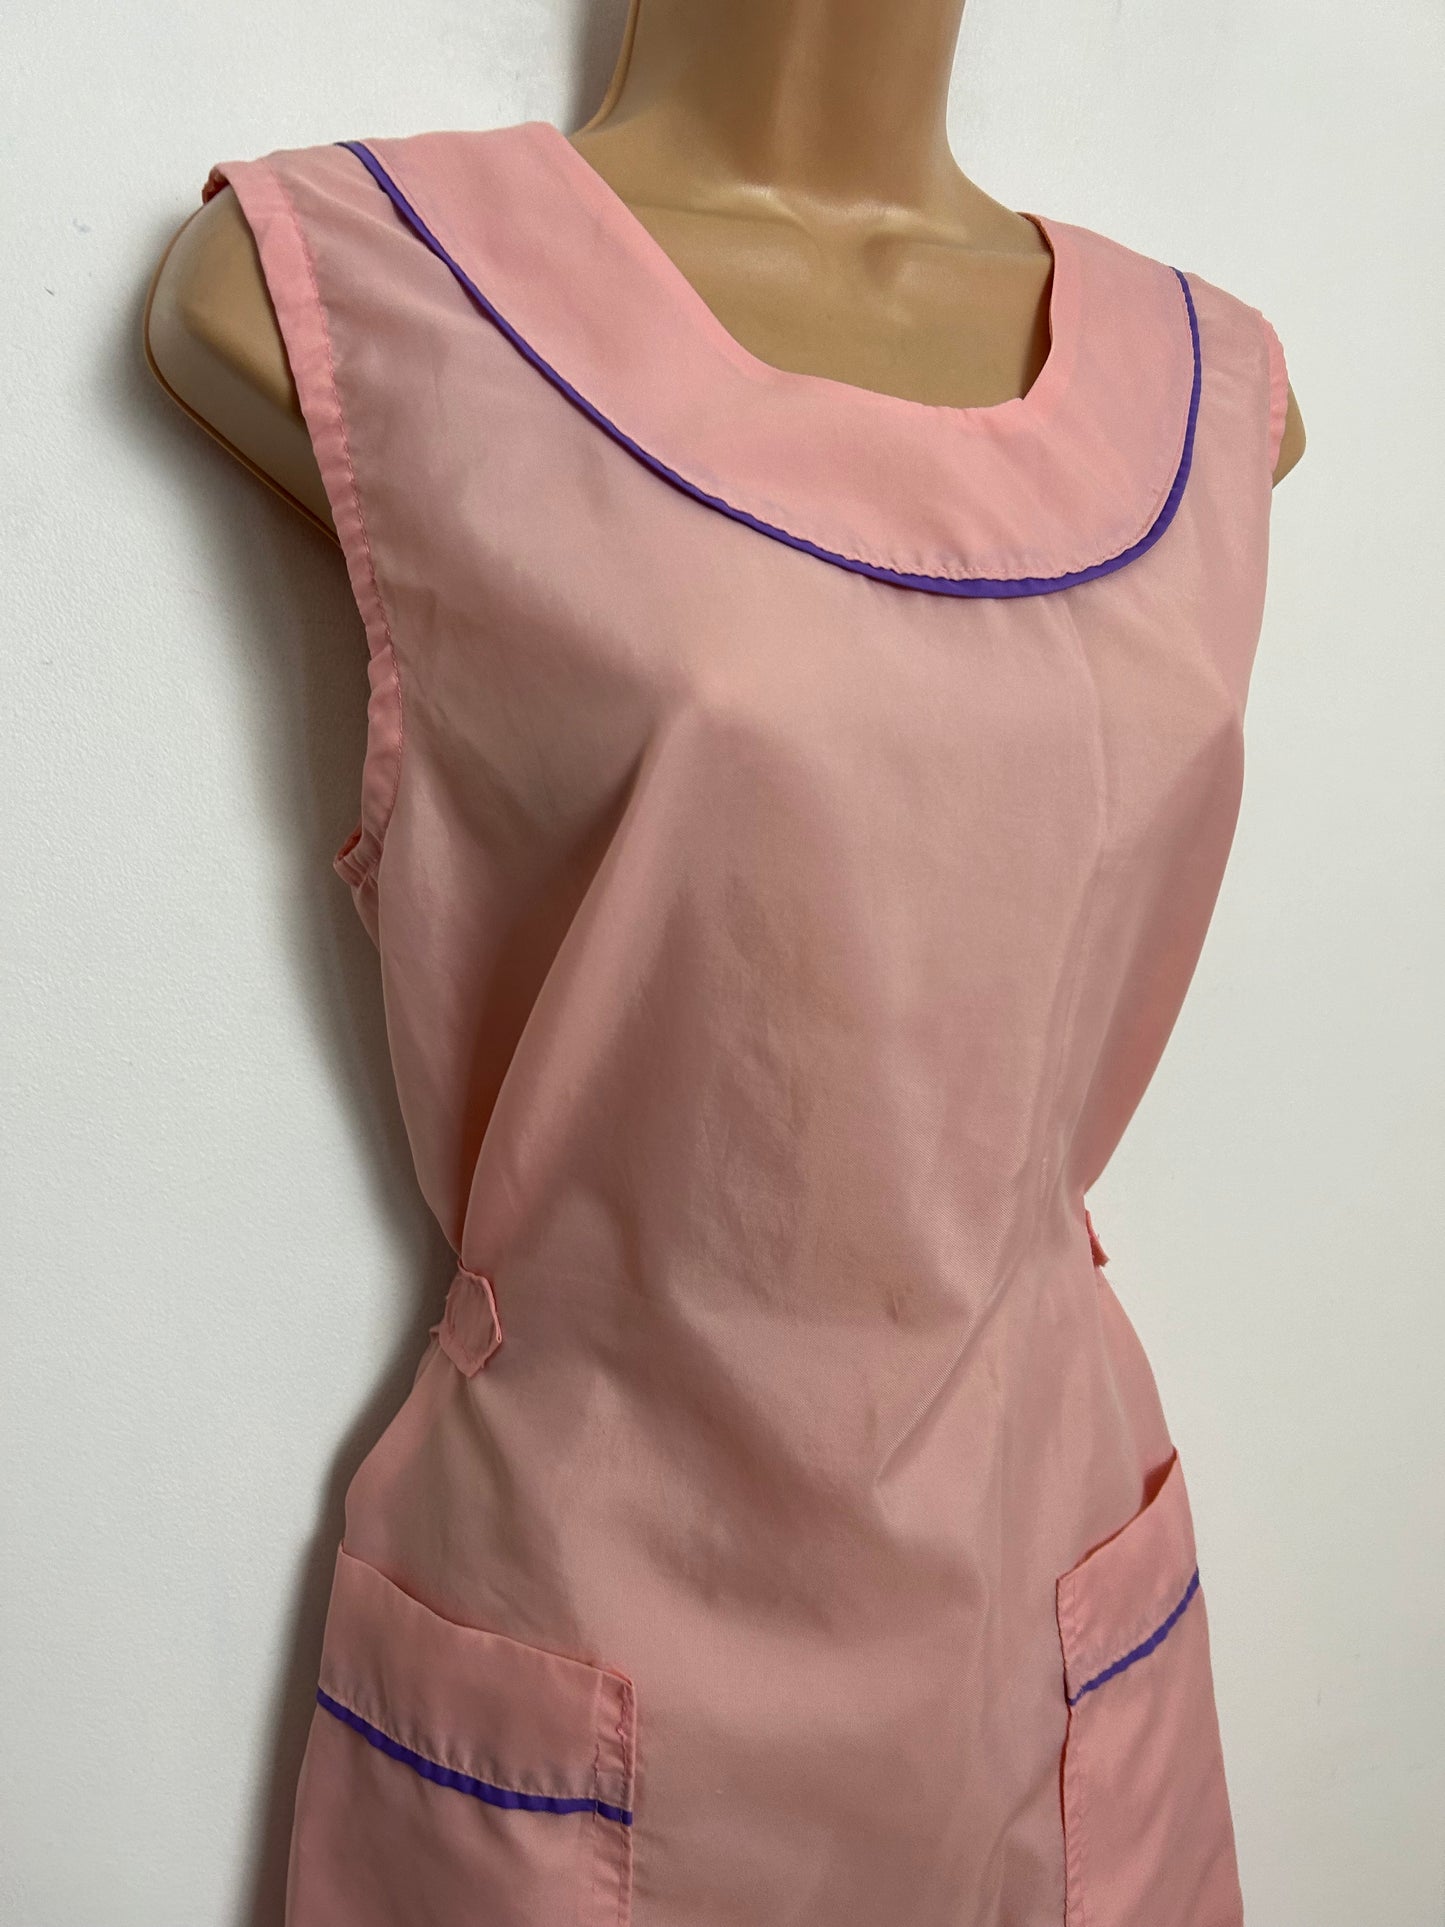 Vintage 1960s Up To Size 12 Pink Pocket Detail Housewife Tie Back House Coat Style Apron